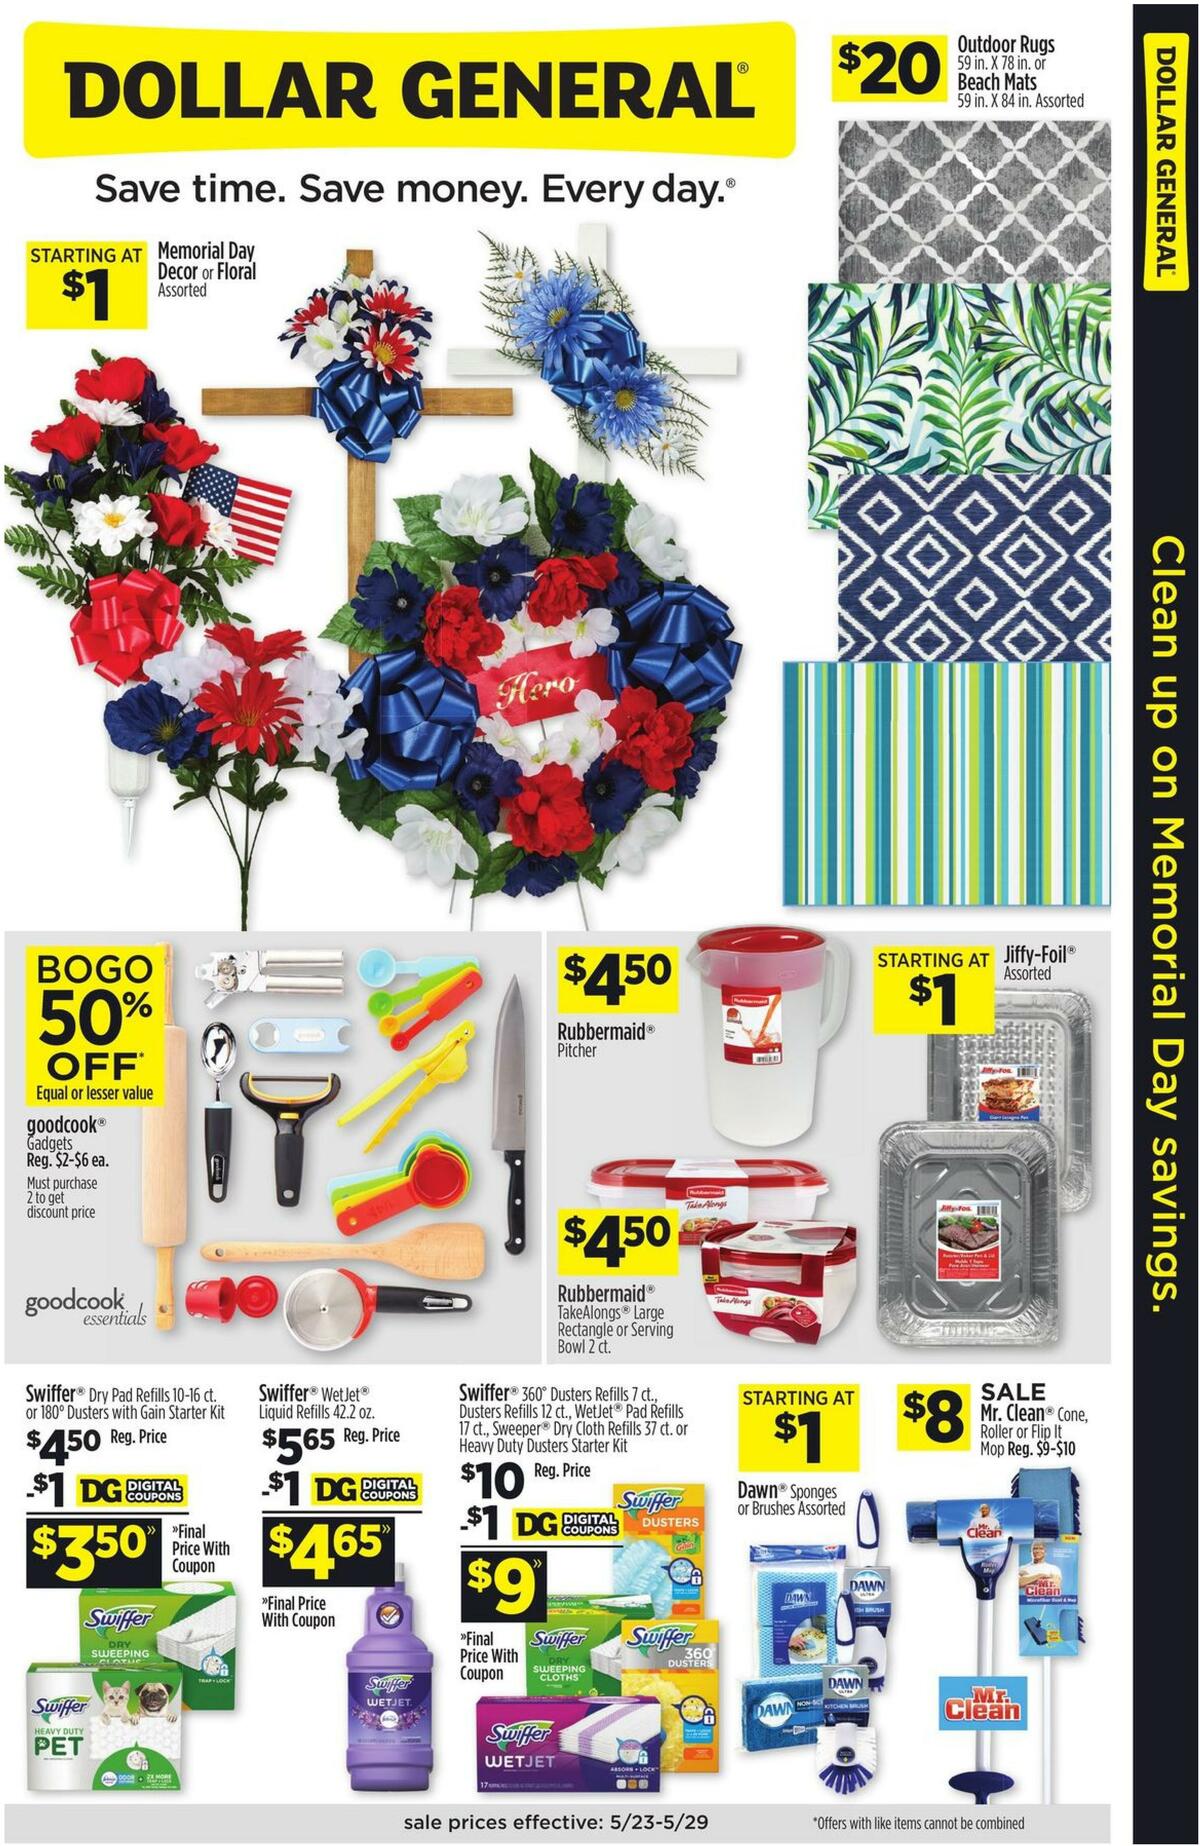 Dollar General Clean Up On Memorial Day Savings Weekly Ads and